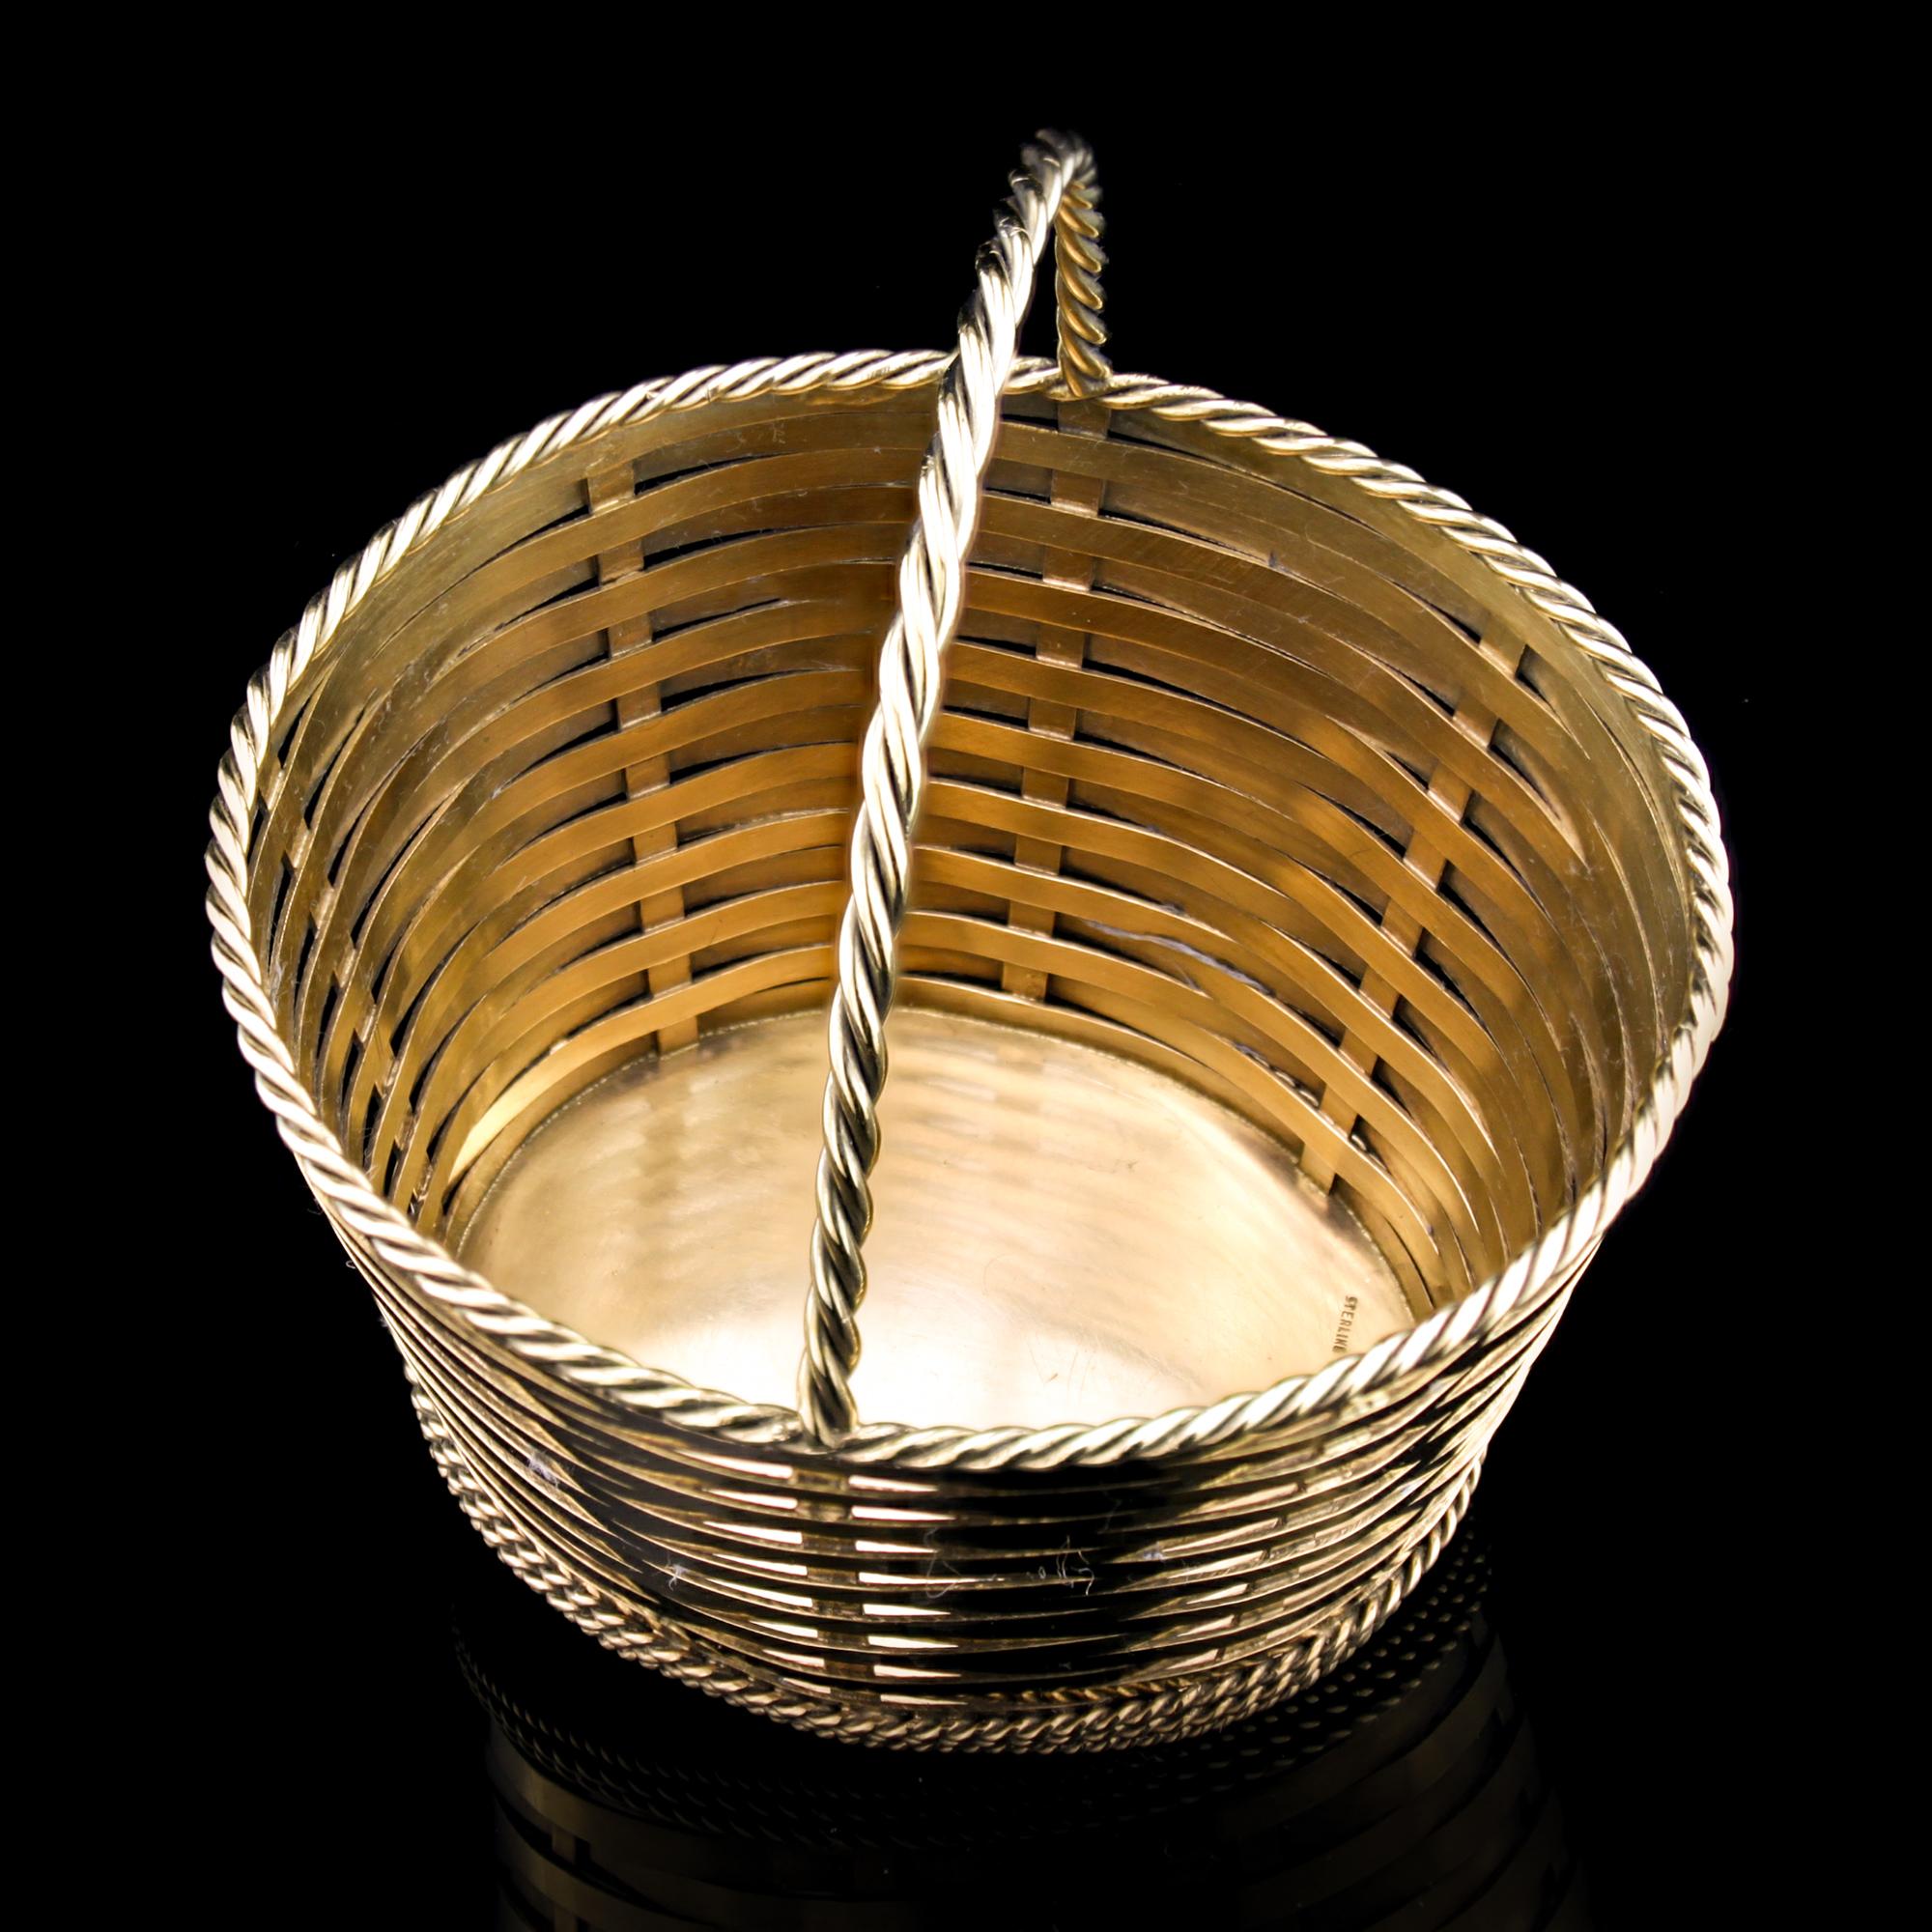 Tiffany & Co Antique Silver Gilt Basket, Early 20th Century For Sale 1